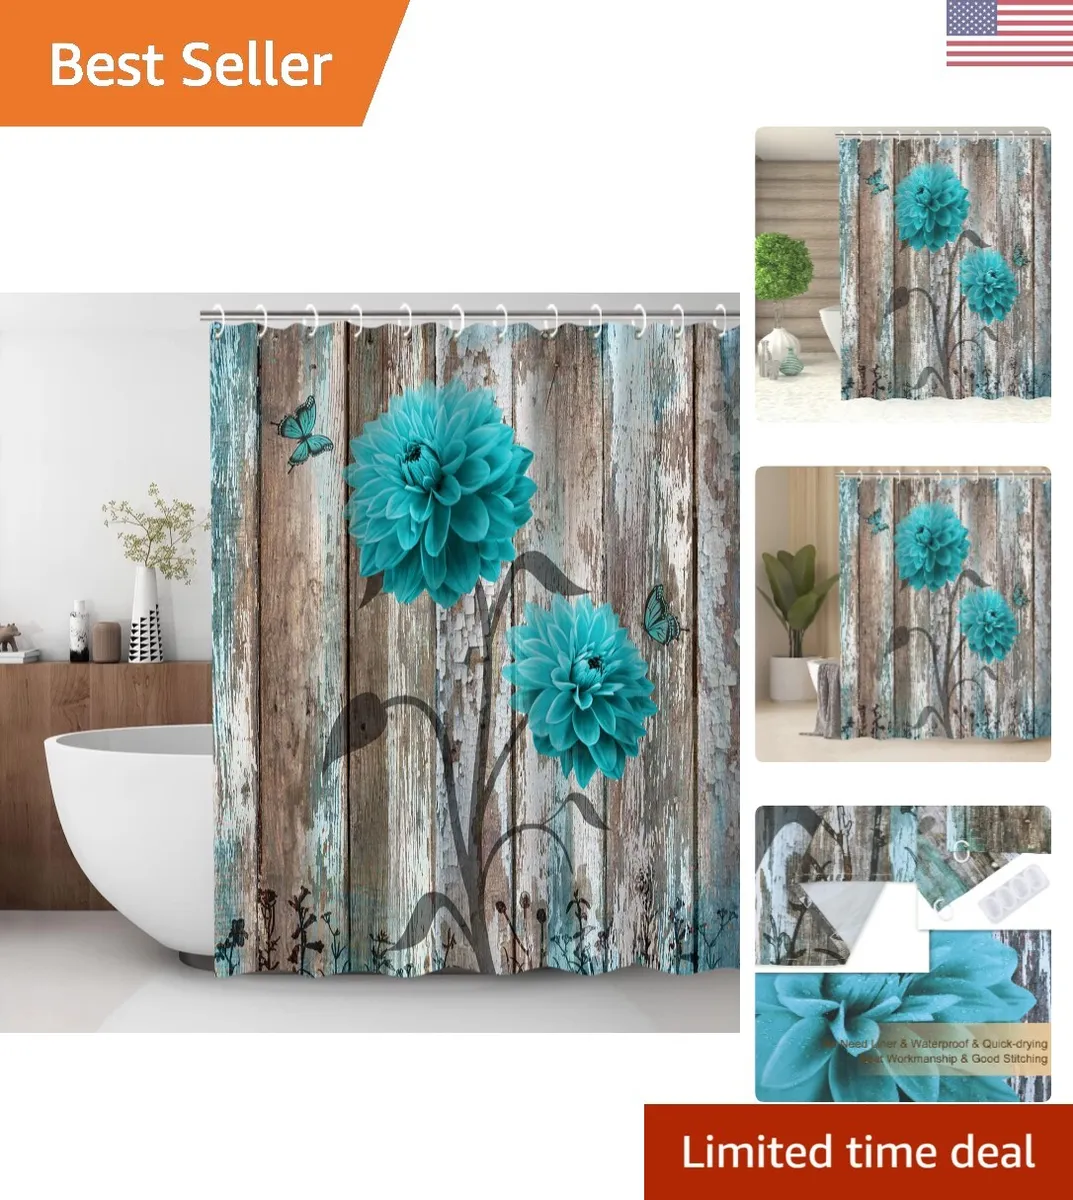 Teal Floral Shower Curtain Set with 12 Hooks - Farmhouse Turquoise Blue  Flower